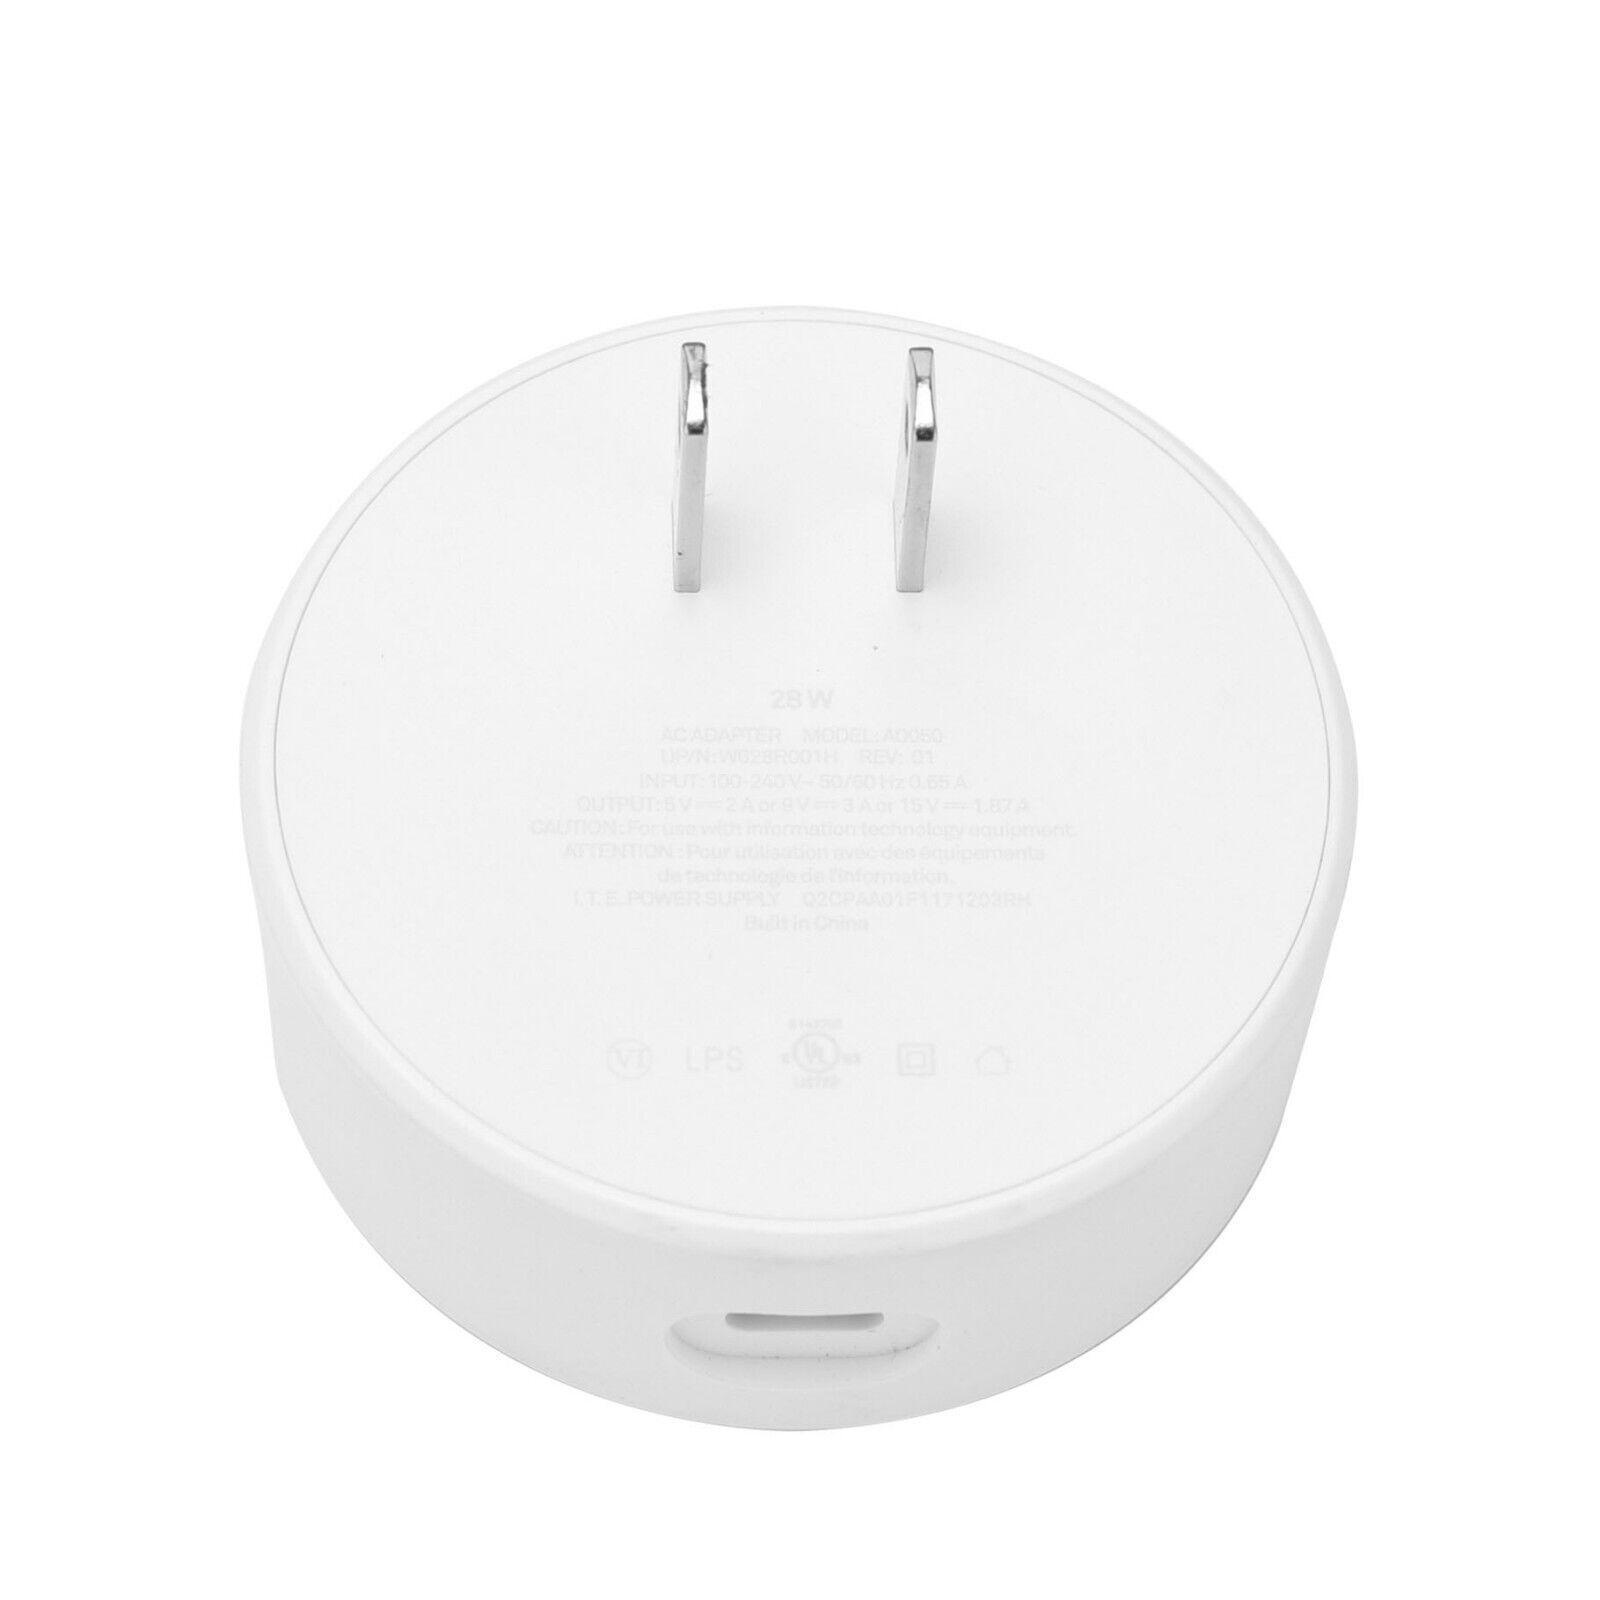 28W PD USB-C TYPE C Power Adapter charger A0050 For Google Nest Cam IQ indoor US Brand Unbranded Colour White Model A00